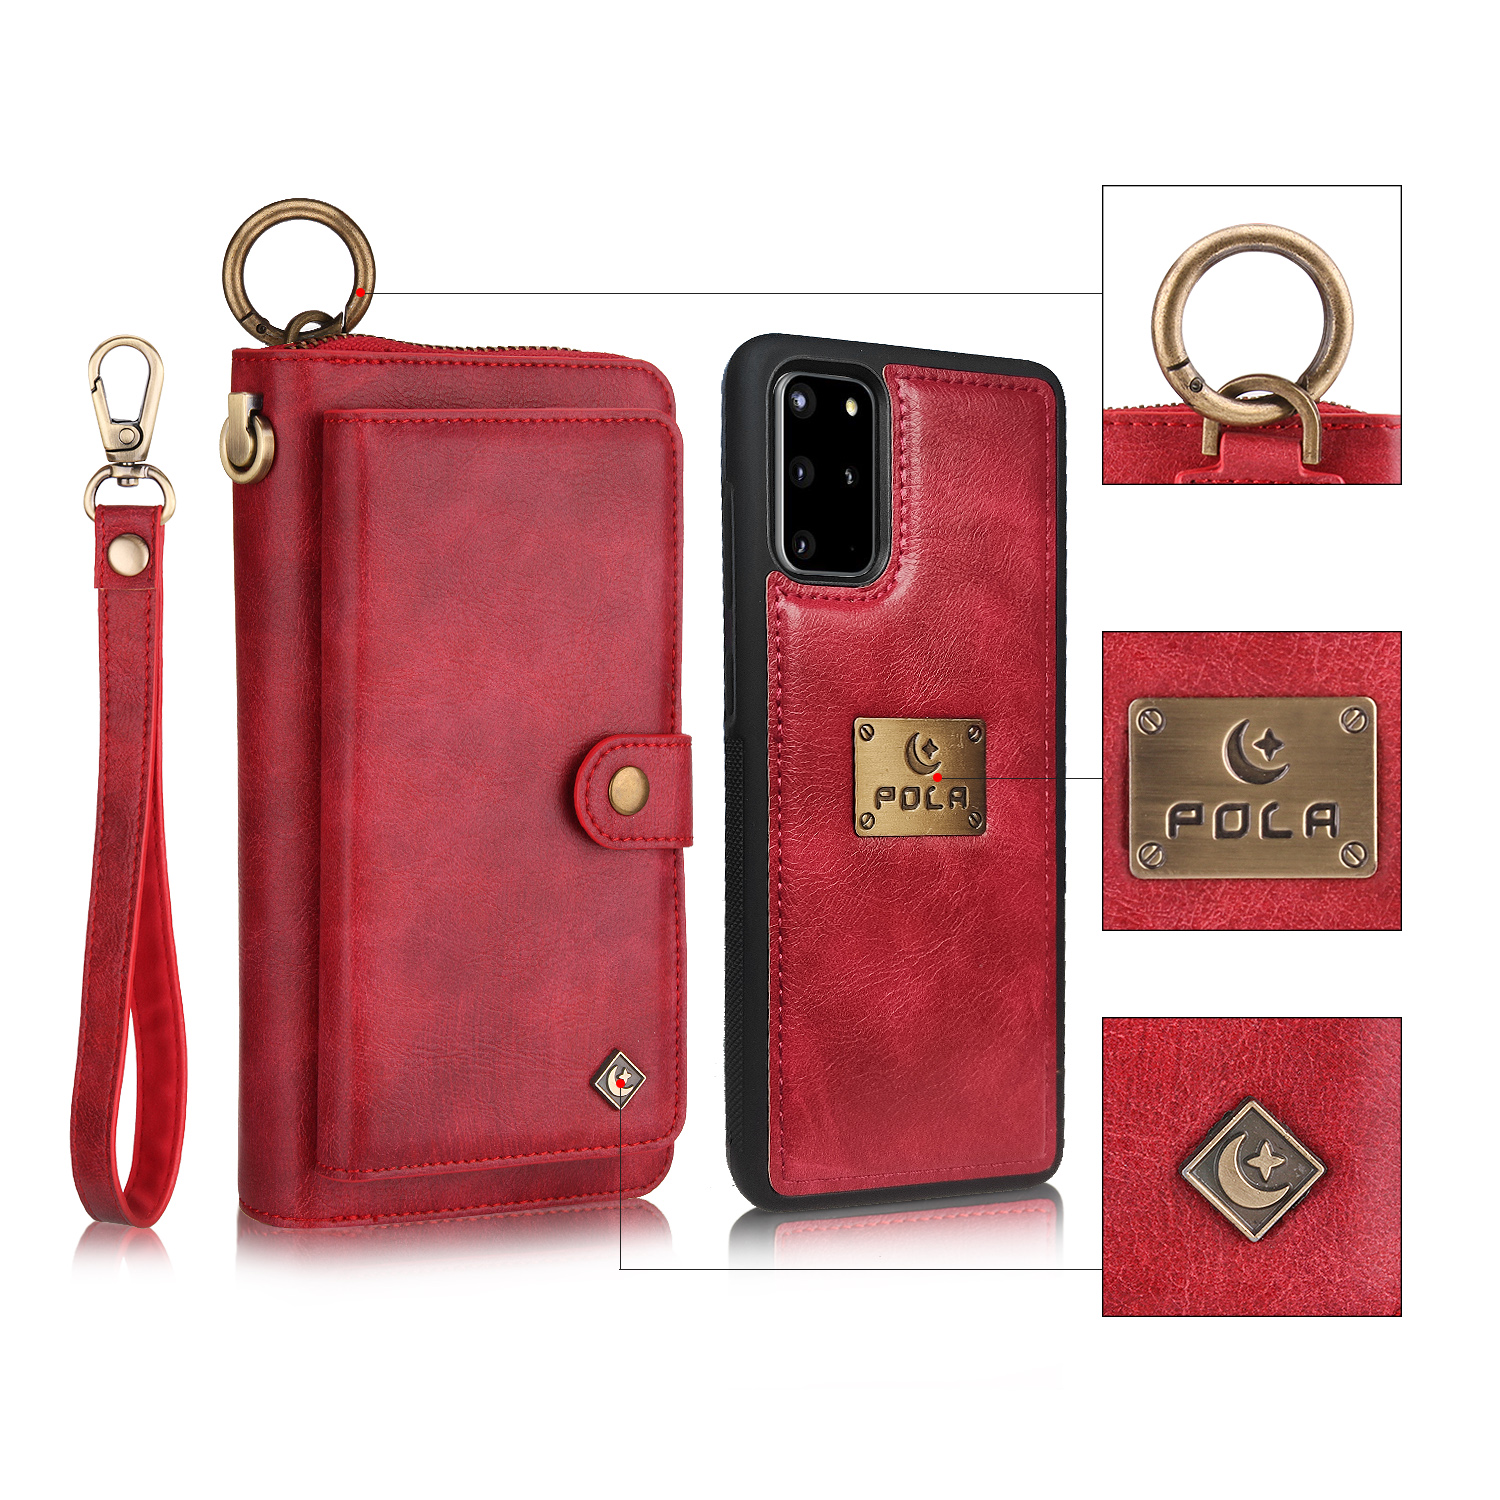 Galaxy S20+ Plus Case, Allytech Retro PU Leather Magnetic Detachable Back Cover Zipper Wallet Folio Multiple Cards Slots Purse Wrist Strap Clutch Protective Case for Samsung Galaxy S20 Plus,Red - image 1 of 9